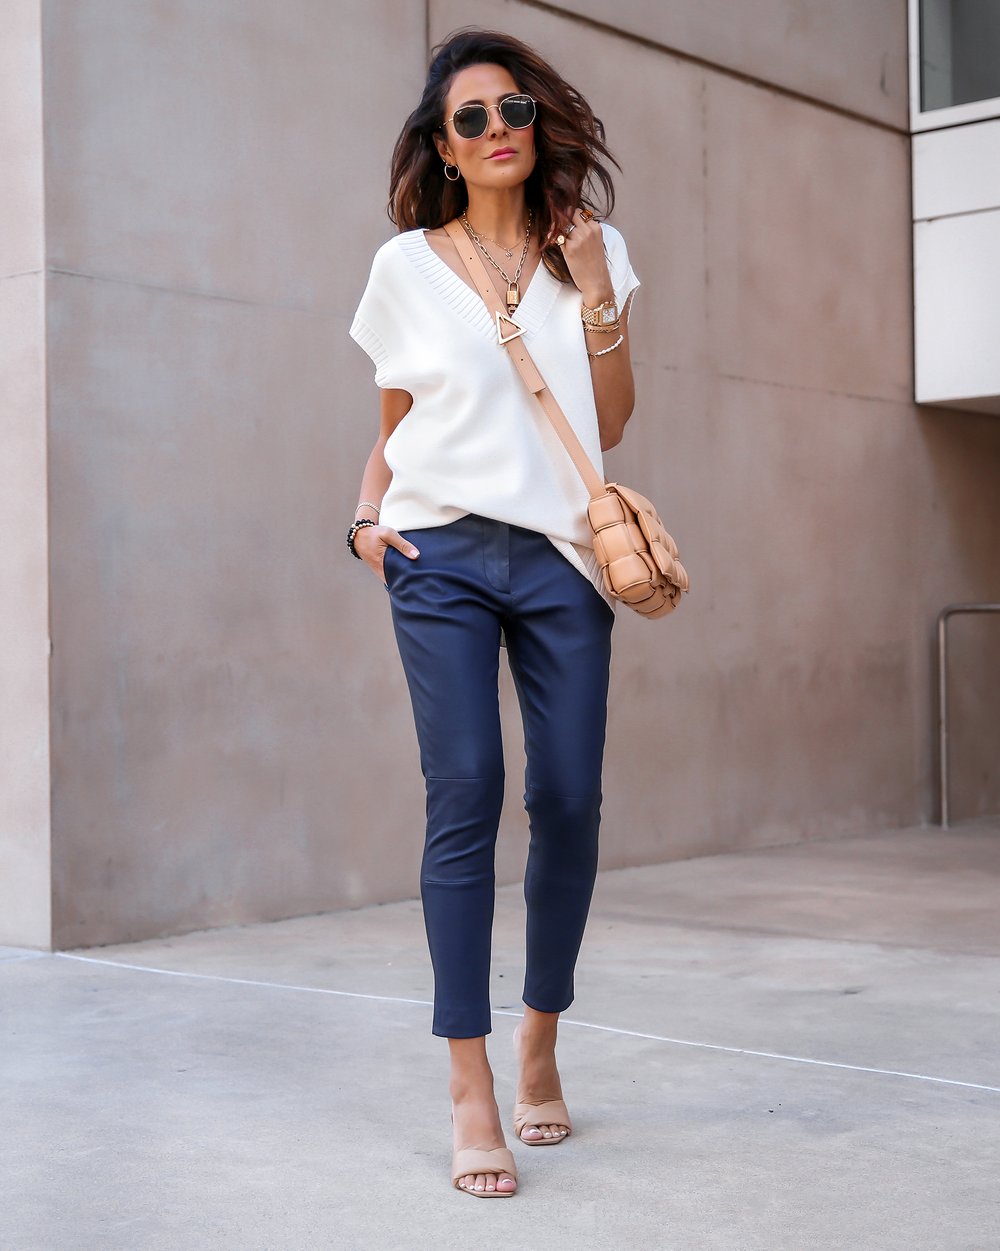 Spring Blazers I'm Obsessed With — Lucy's whims